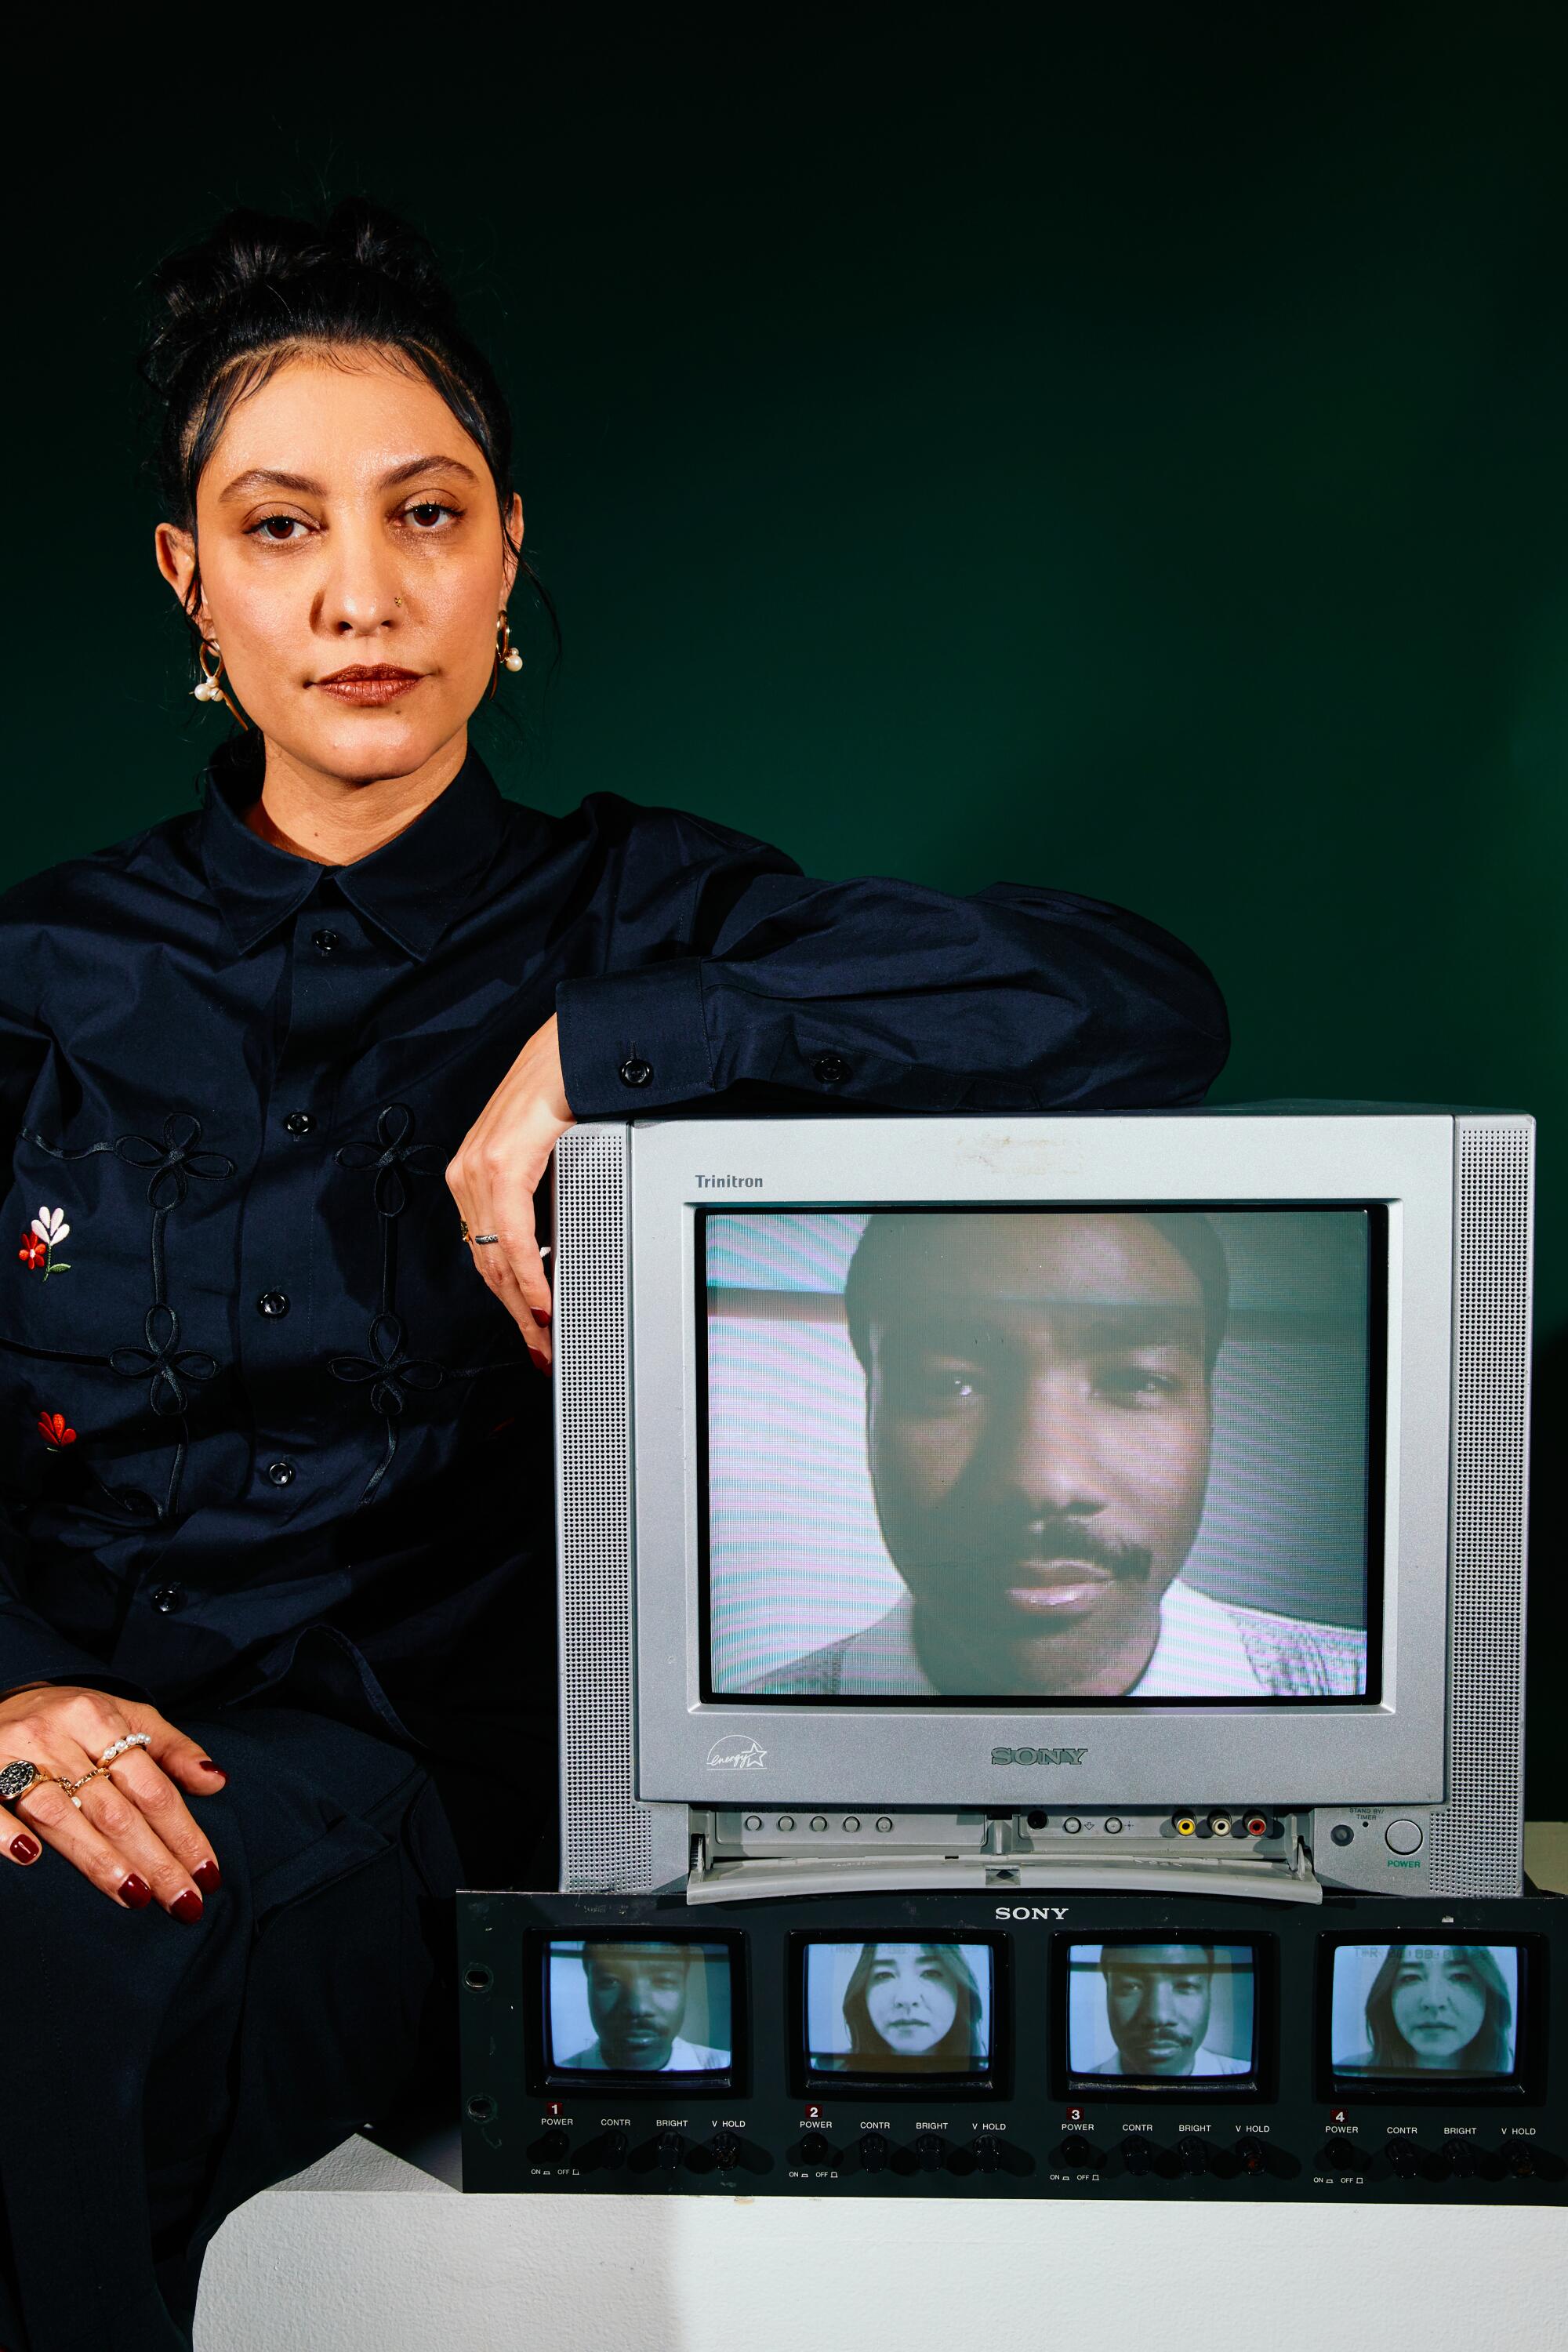 A woman leans her arms against a TV displaying Donald Glover's face.